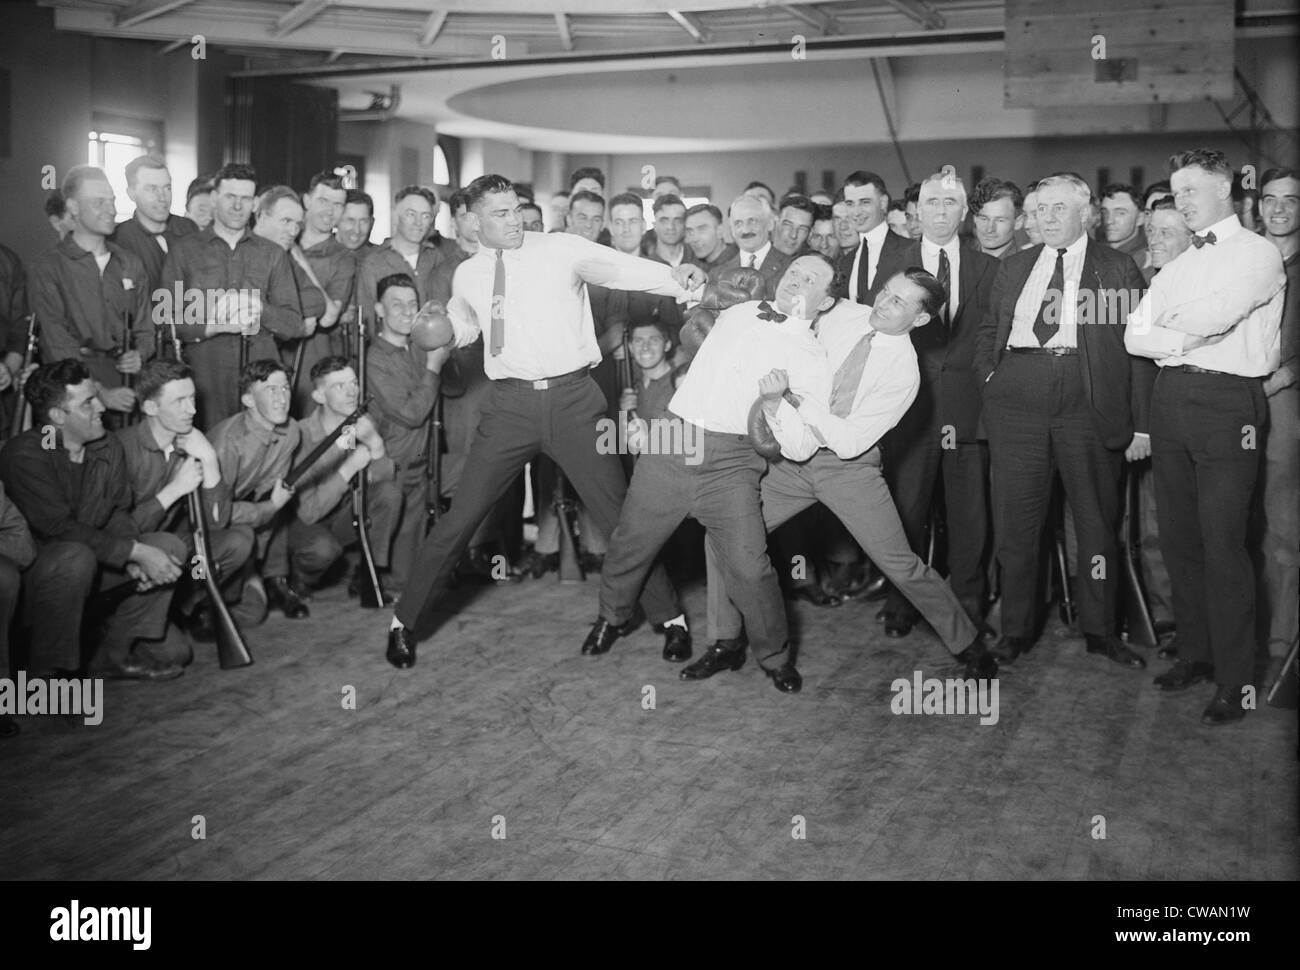 Harry Houdini cannot escape the hold of boxer Benny Leonard and Jack Dempsey prepare to swing.  Houdini claimed he could Stock Photo